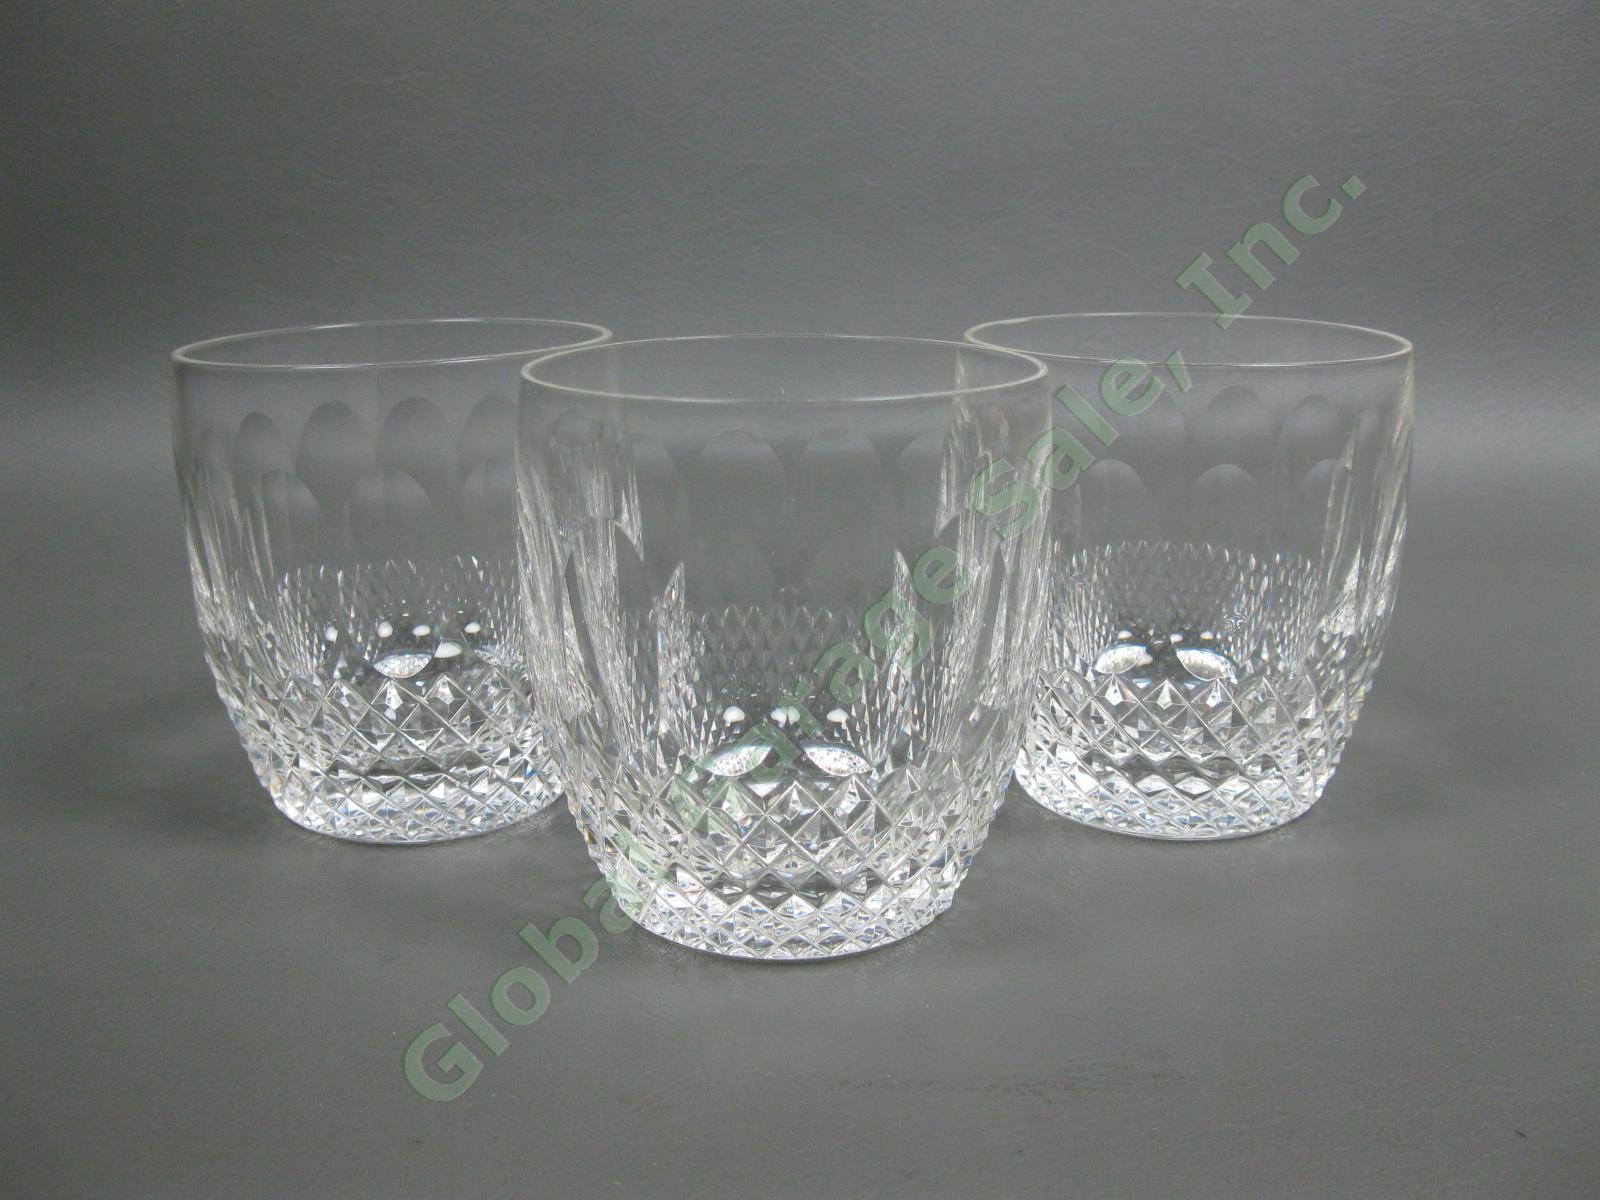 3 Waterford Crystal Colleen 9oz Water Tumbler Glasses Cut Hand-Blown Glass Set